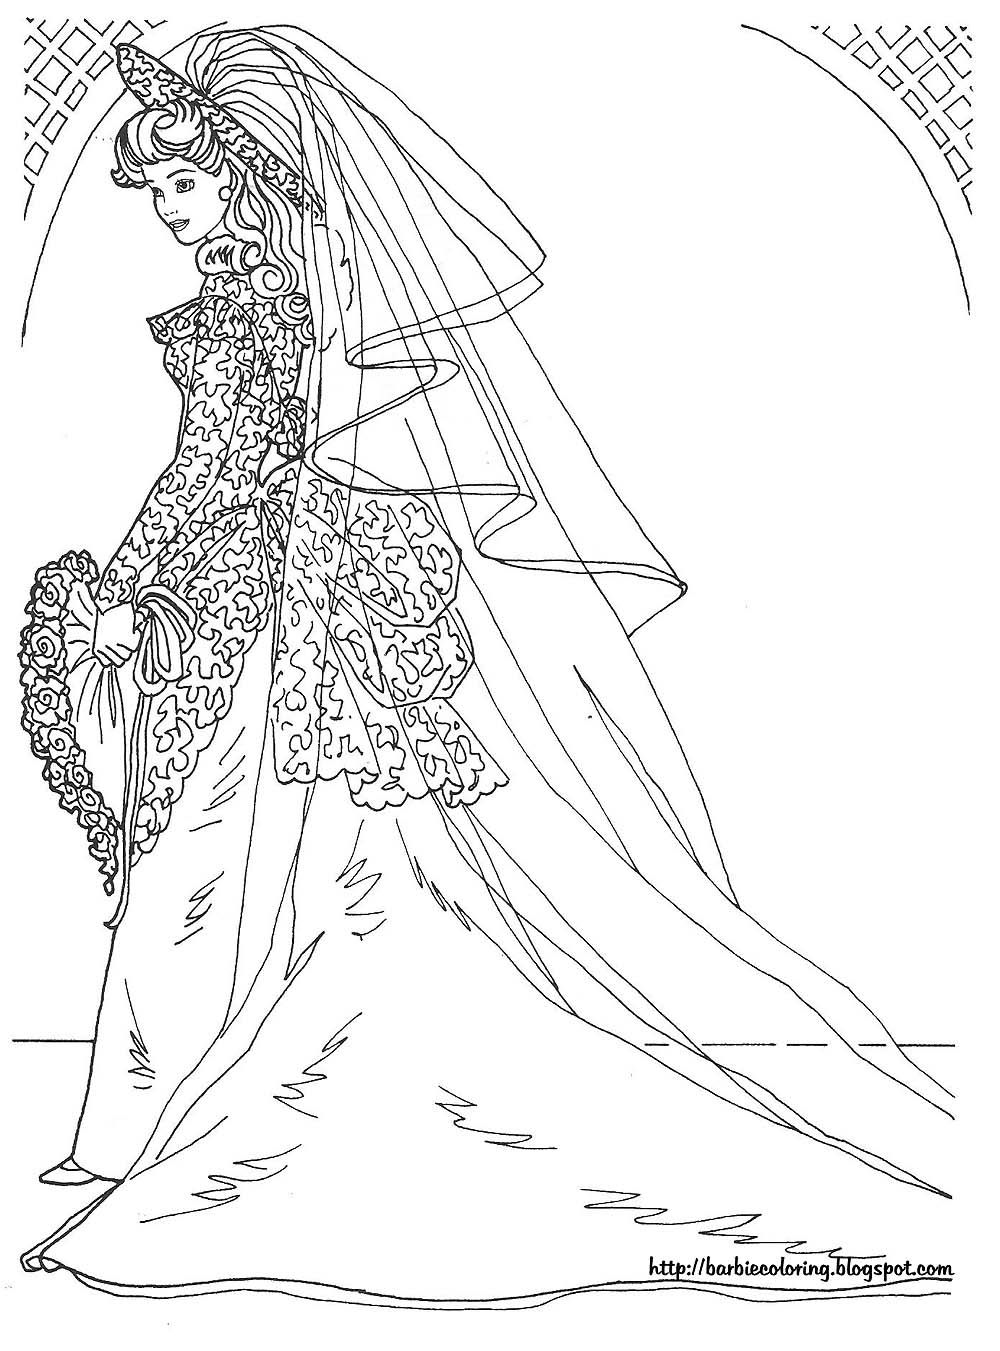 BARBIE COLORING PAGES BARBIE WEDDING DRESS COLORING PAGES ...